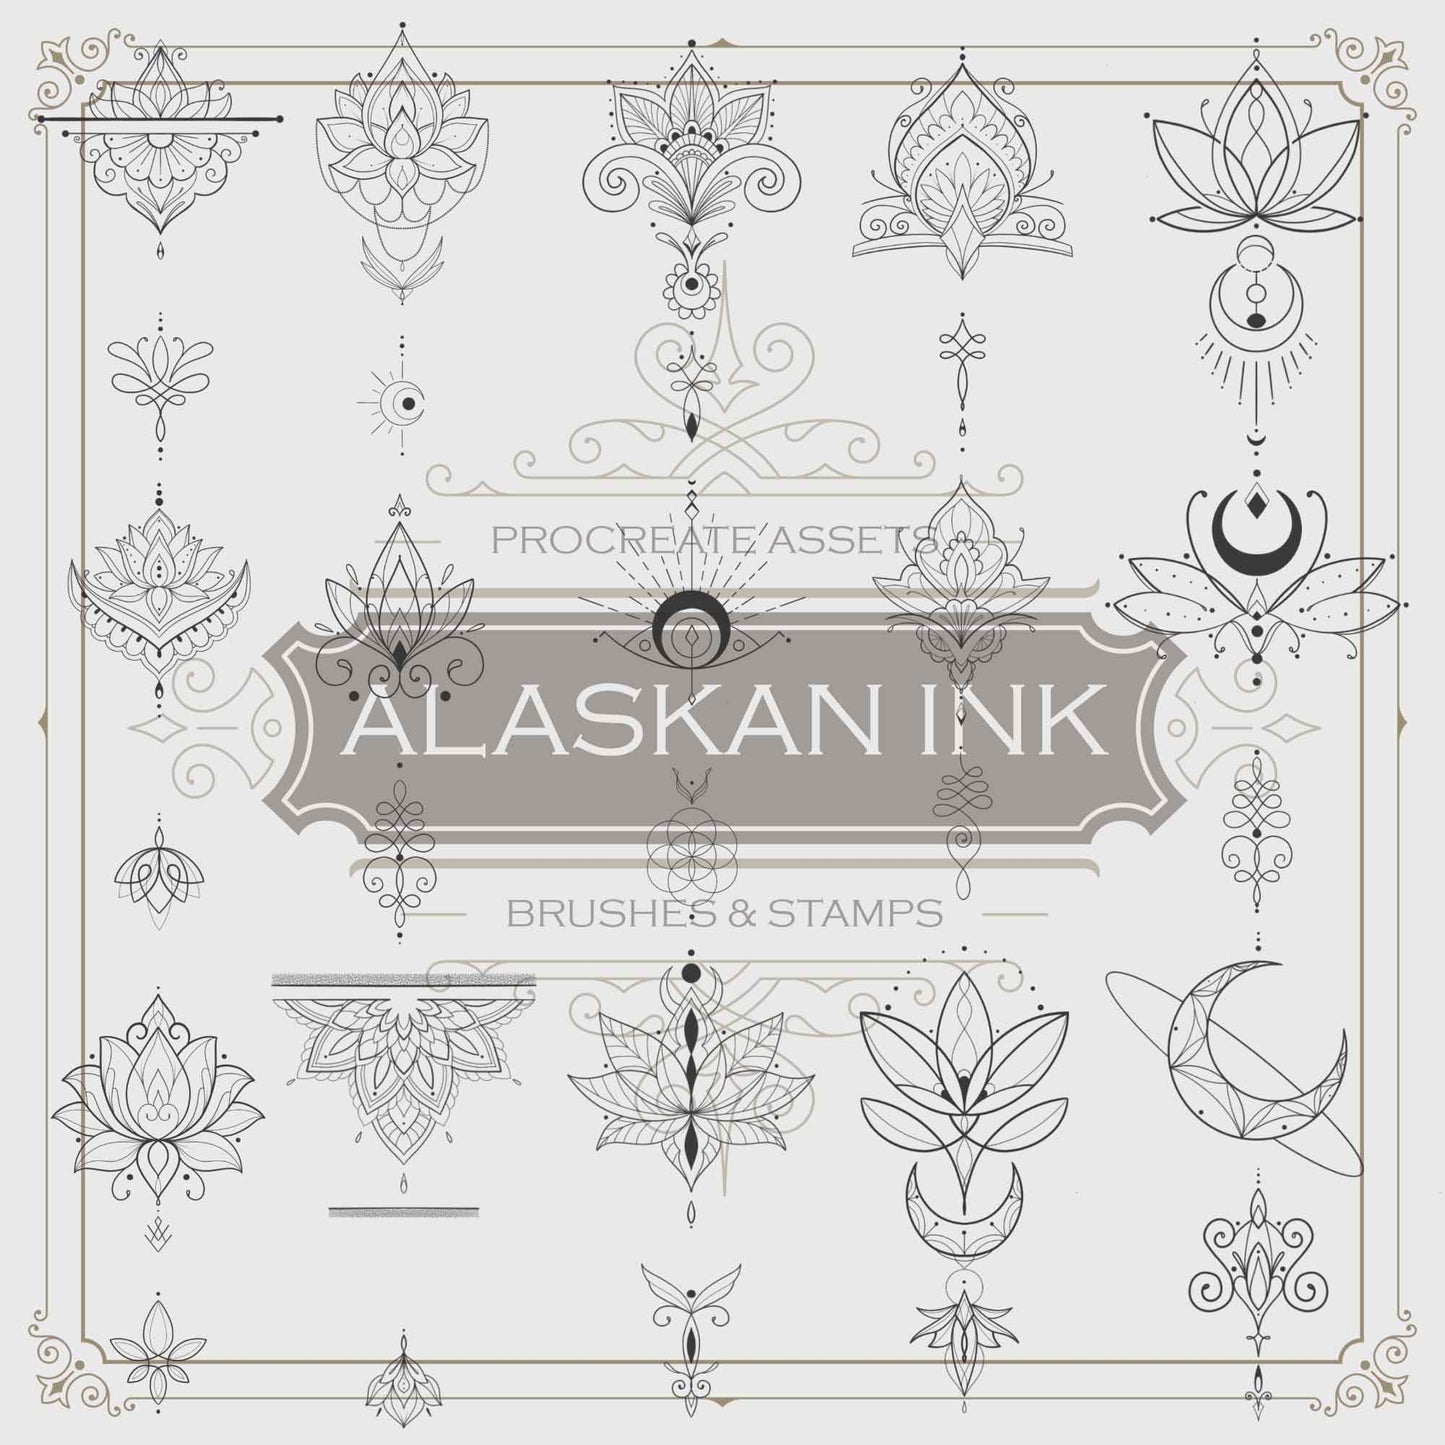 90 Cosmic Tattoo Ornament Brushes and Stamps for Procreate application created by Alaskan ink